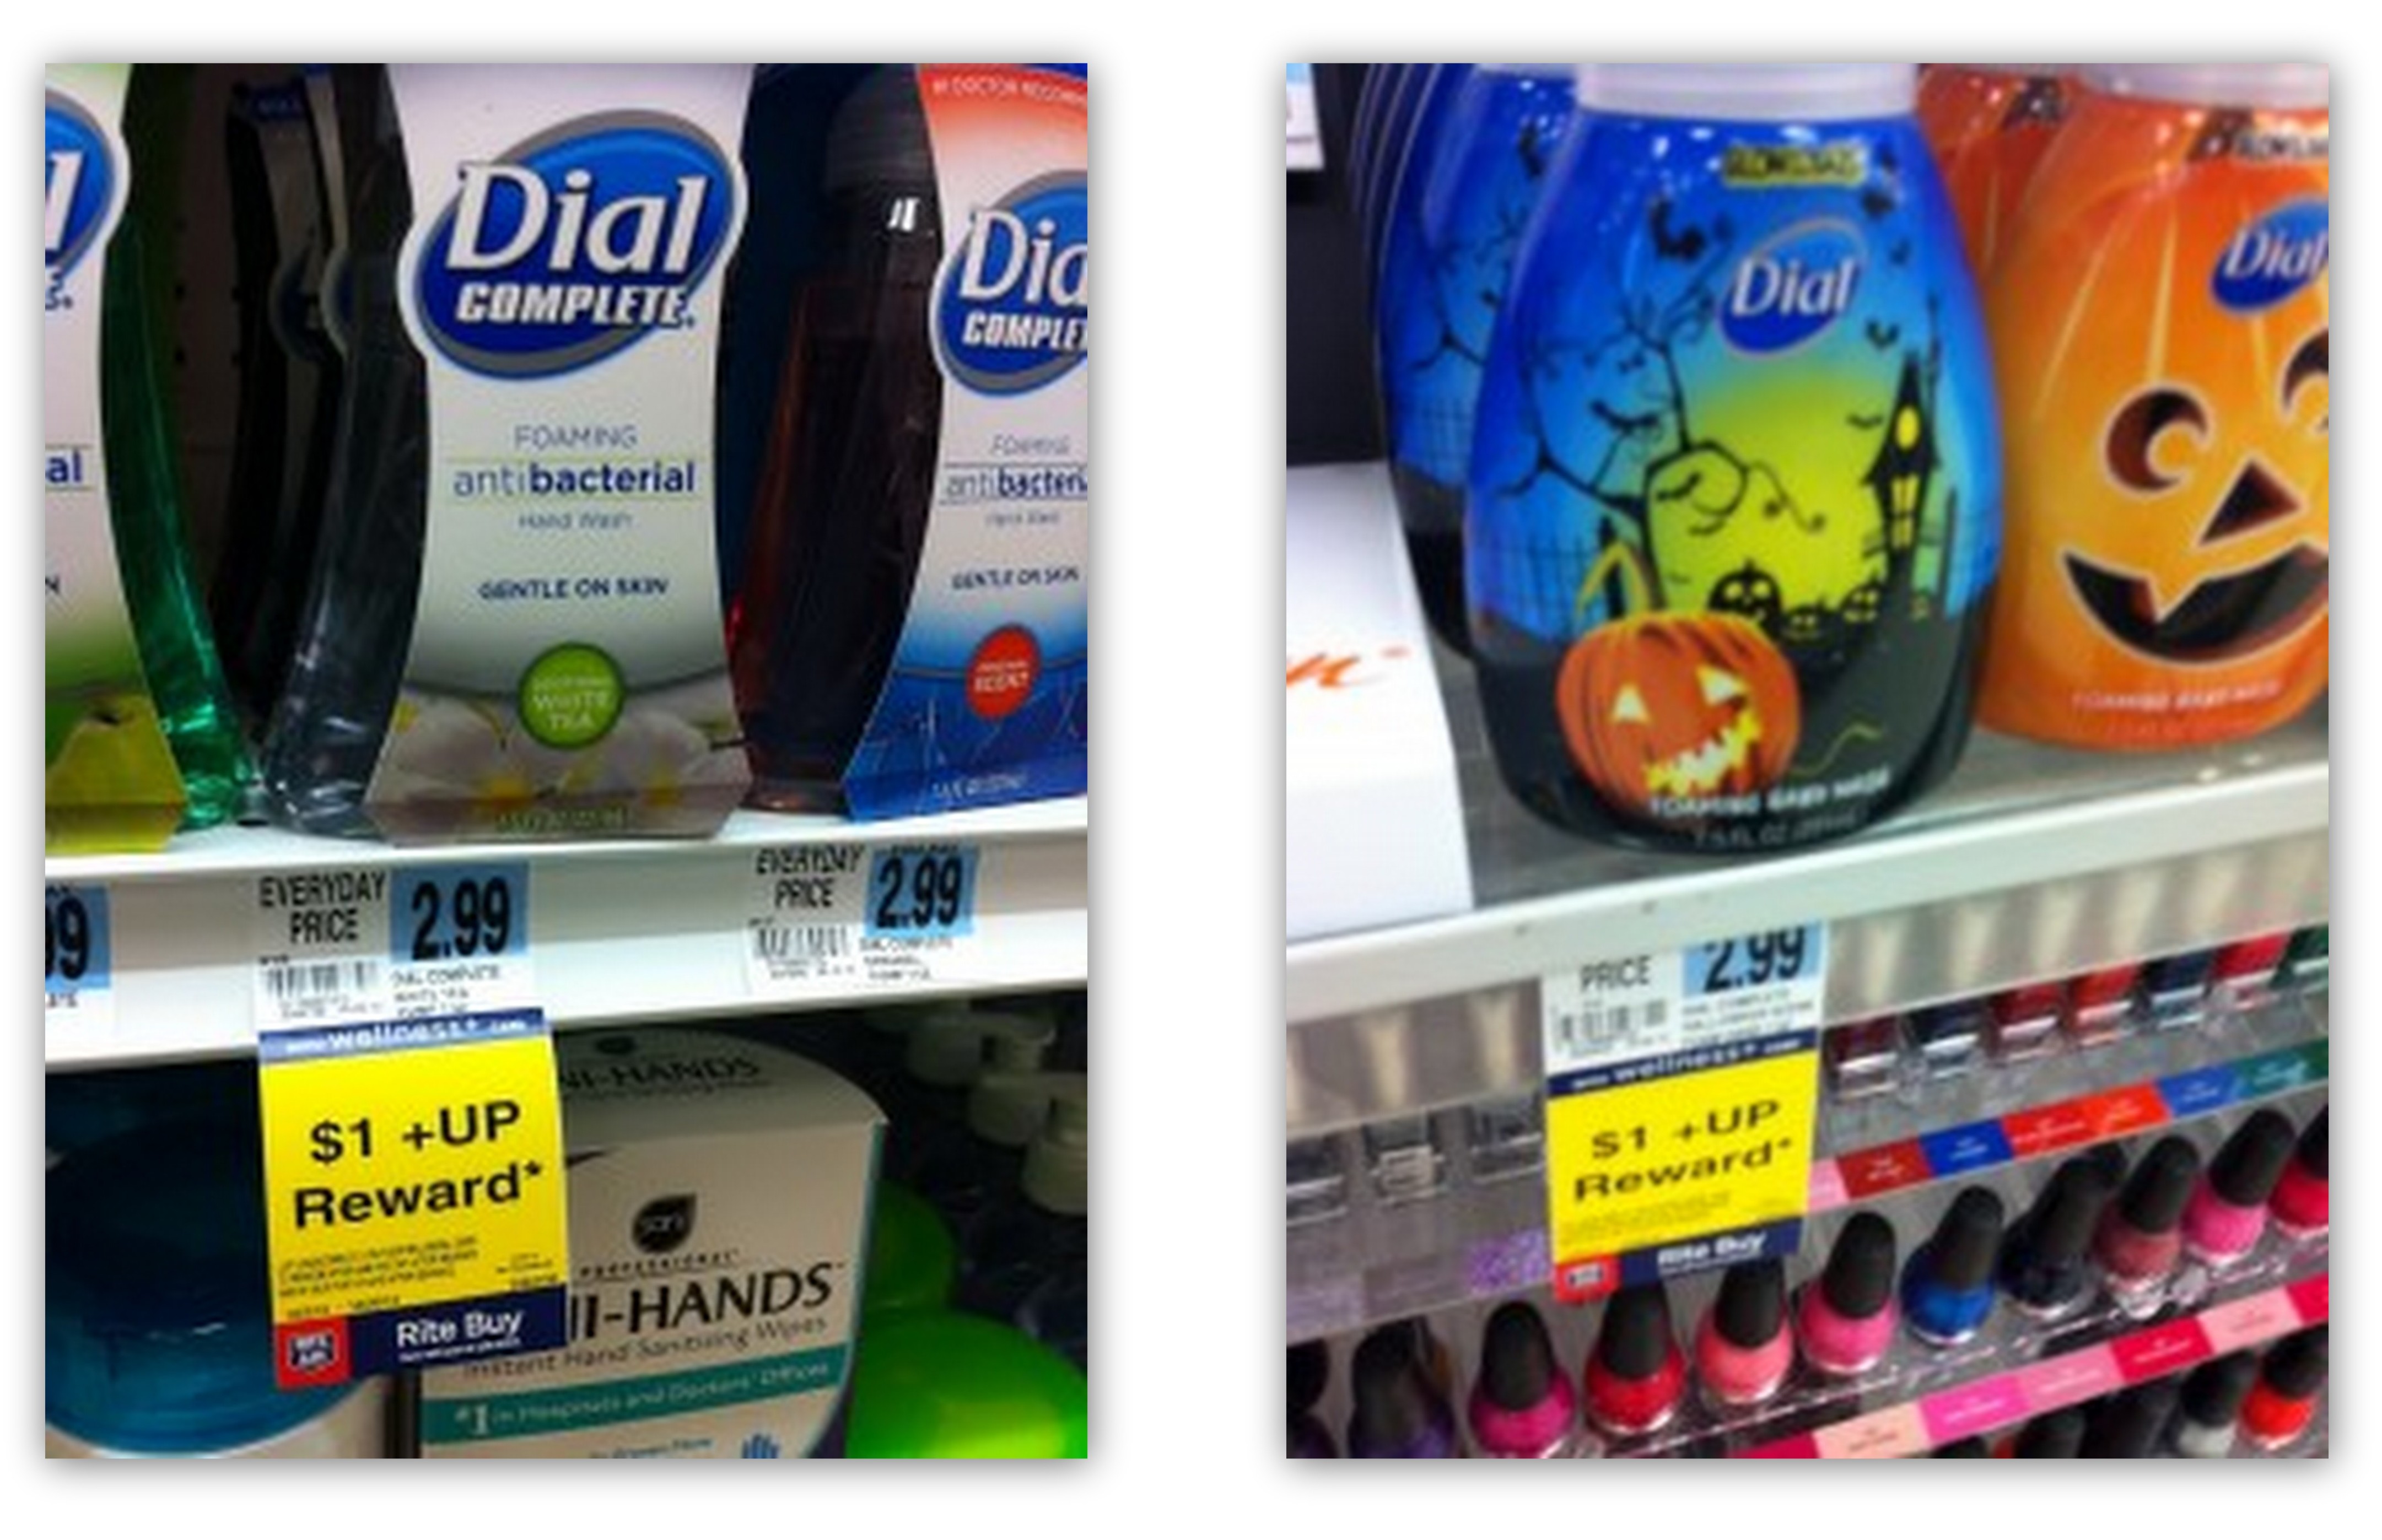 New Dial Soap Printable Coupons = Better Than Free Dial Hand Soap at Rite Aid